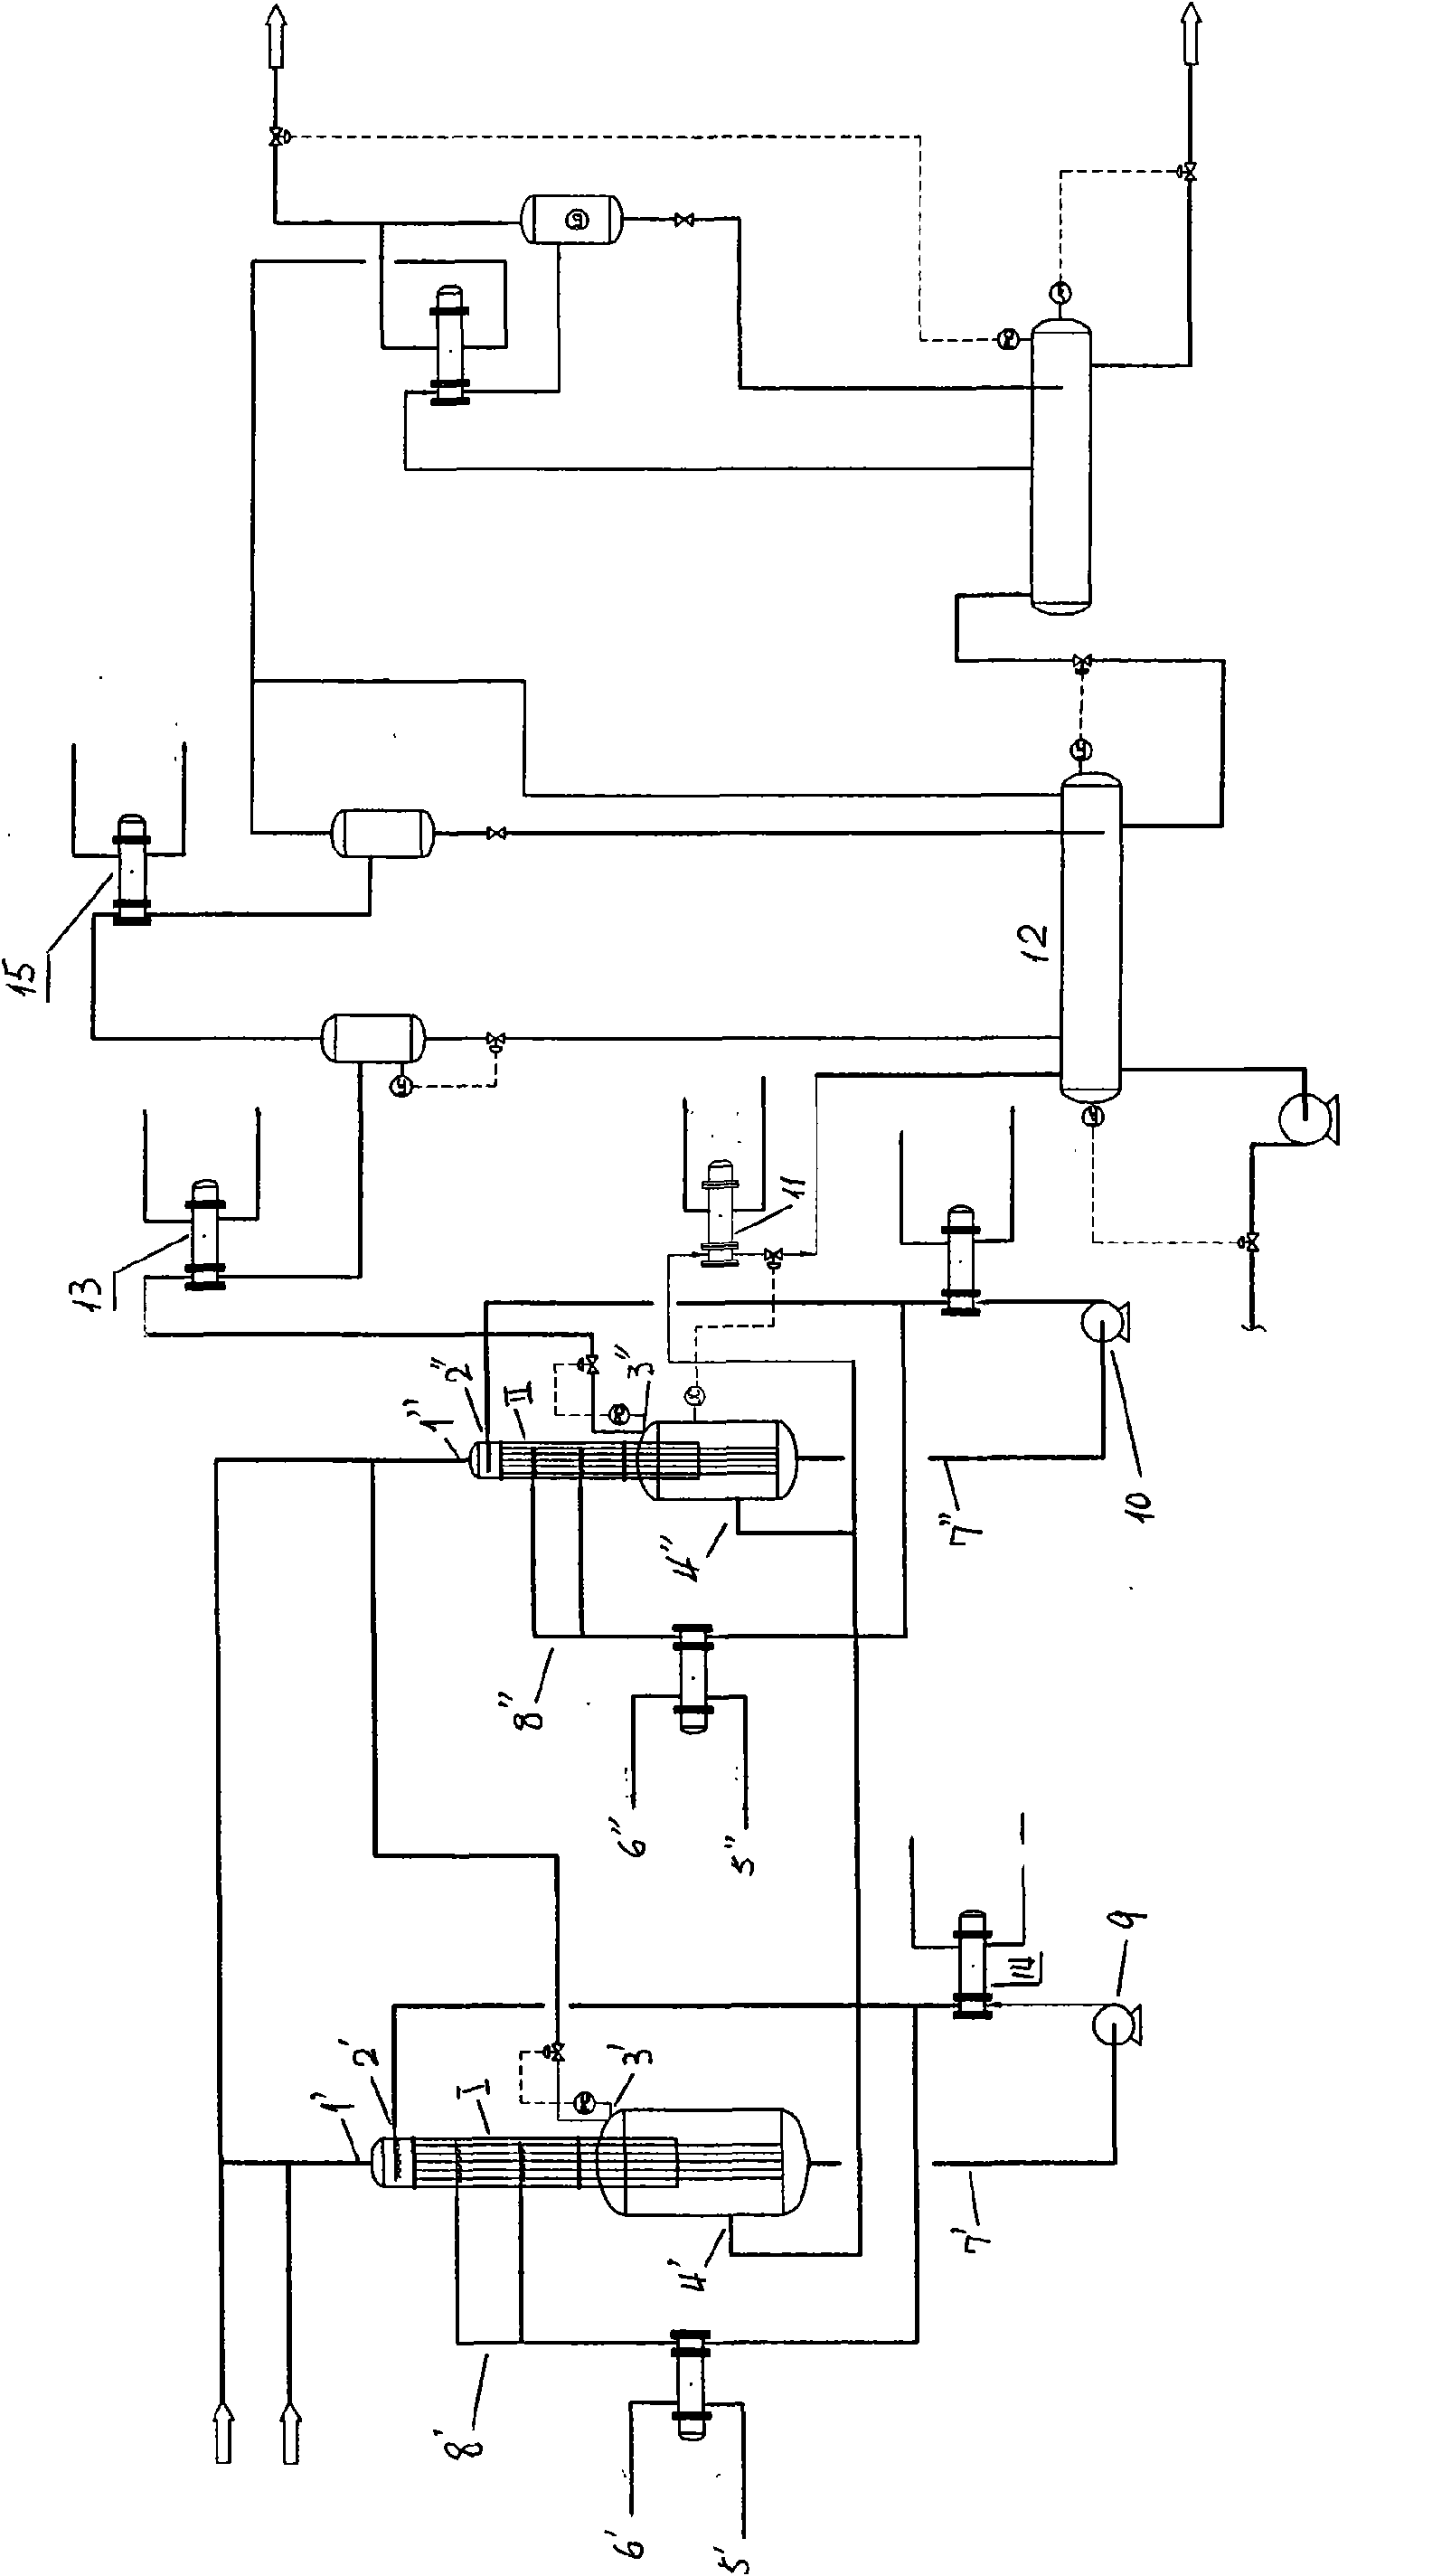 Process for continuously producing corresponding aldehyde by alkene hydroformylation reaction